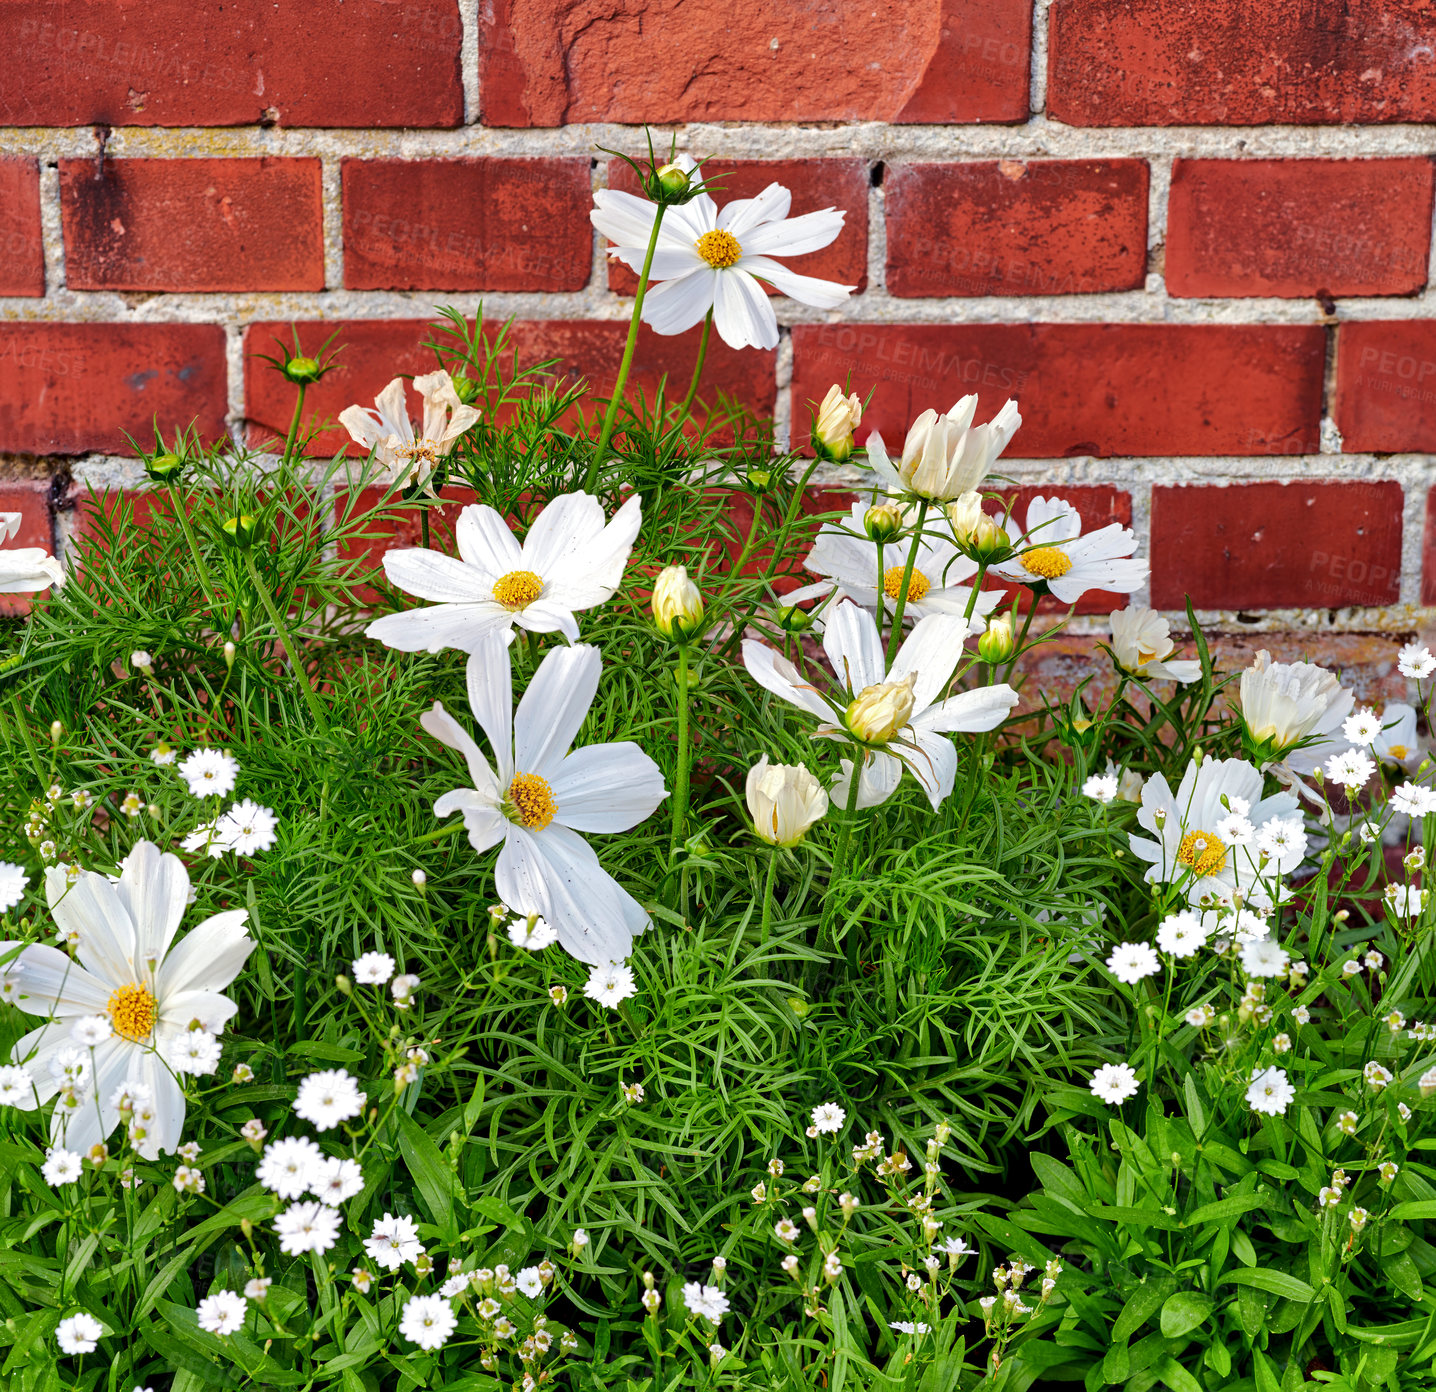 Buy stock photo Closeup of fresh daisies growing against a red brick wall in a garden. A bunch of white flowers, adding to the beauty in nature and peaceful ambience of outdoors. Garden picked blooms in zen backyard